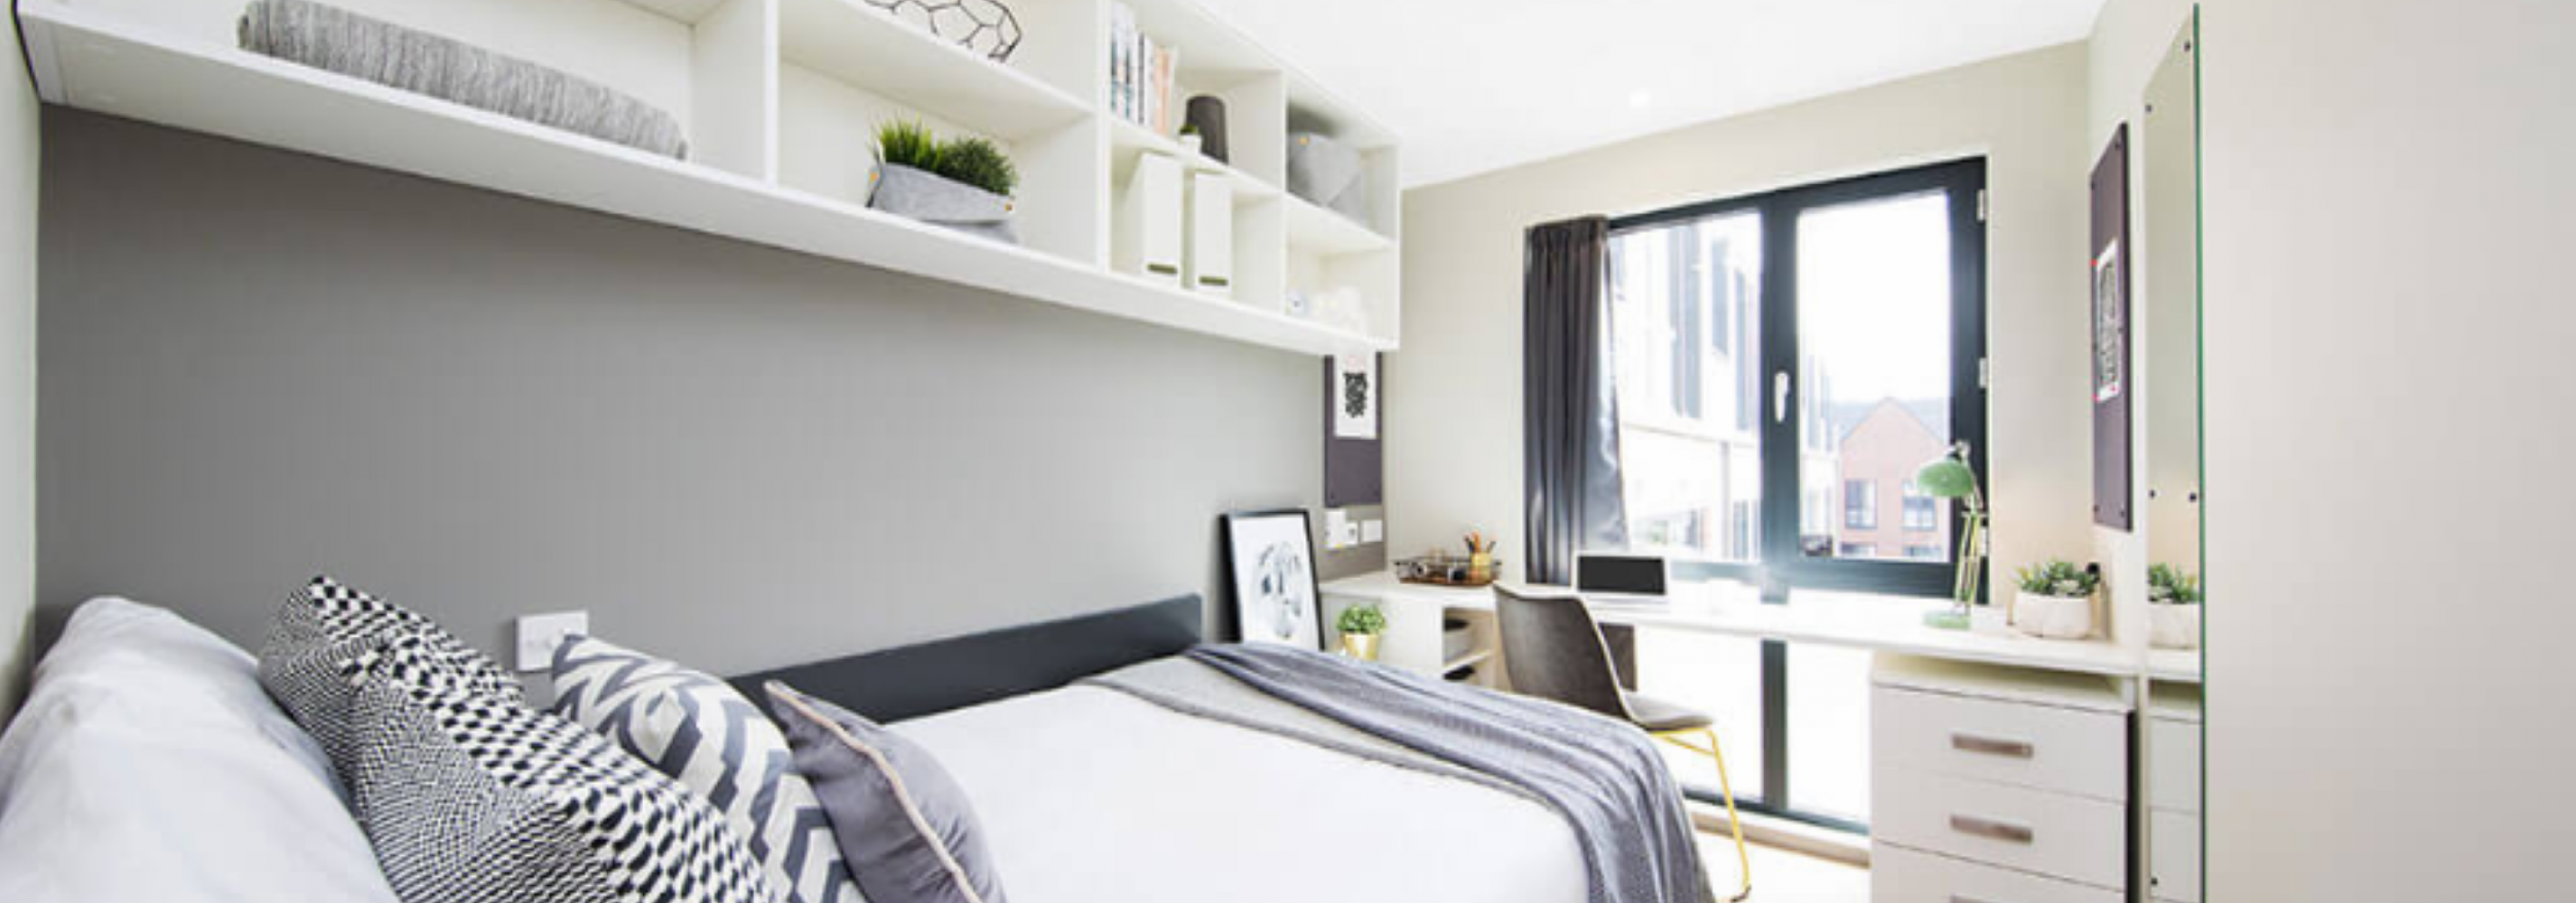 Light modern room with decor in tones of grey and white. Small double bed against the wall and opposite a window. White shelving on the wall above the bed, a desk and drawers under the window.